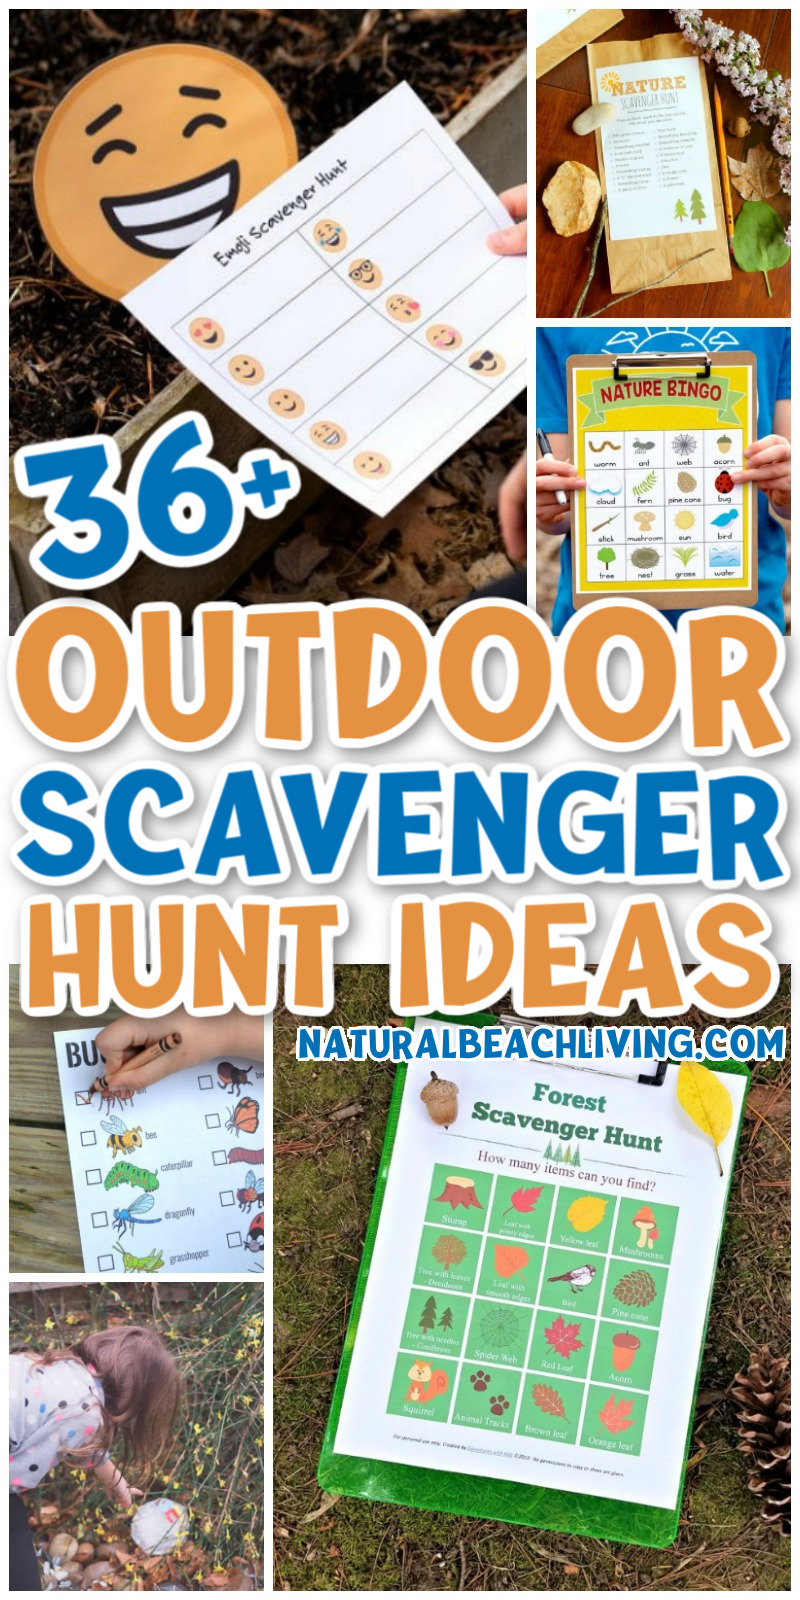 36+ Outdoor Scavenger Hunt Ideas for All Ages - Natural Beach Living